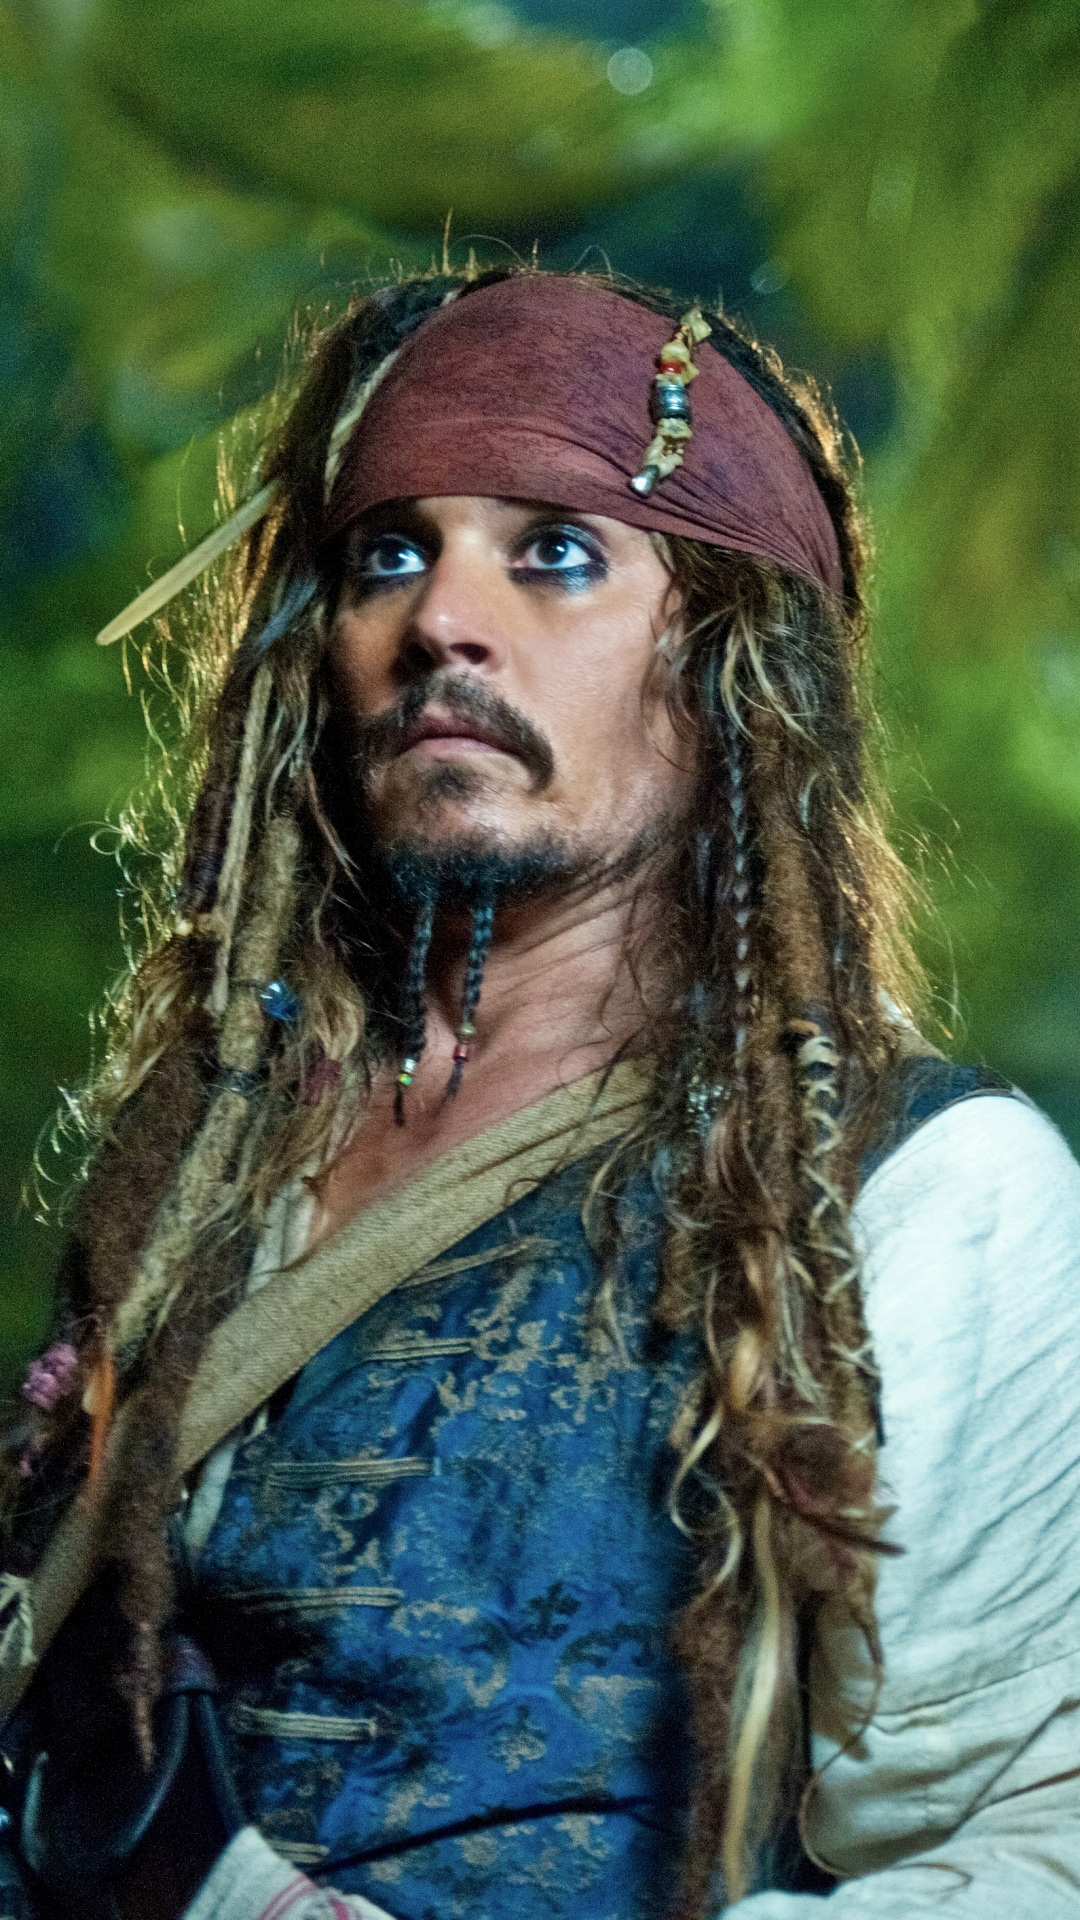 for iphone download Pirates of the Caribbean: On Stranger free